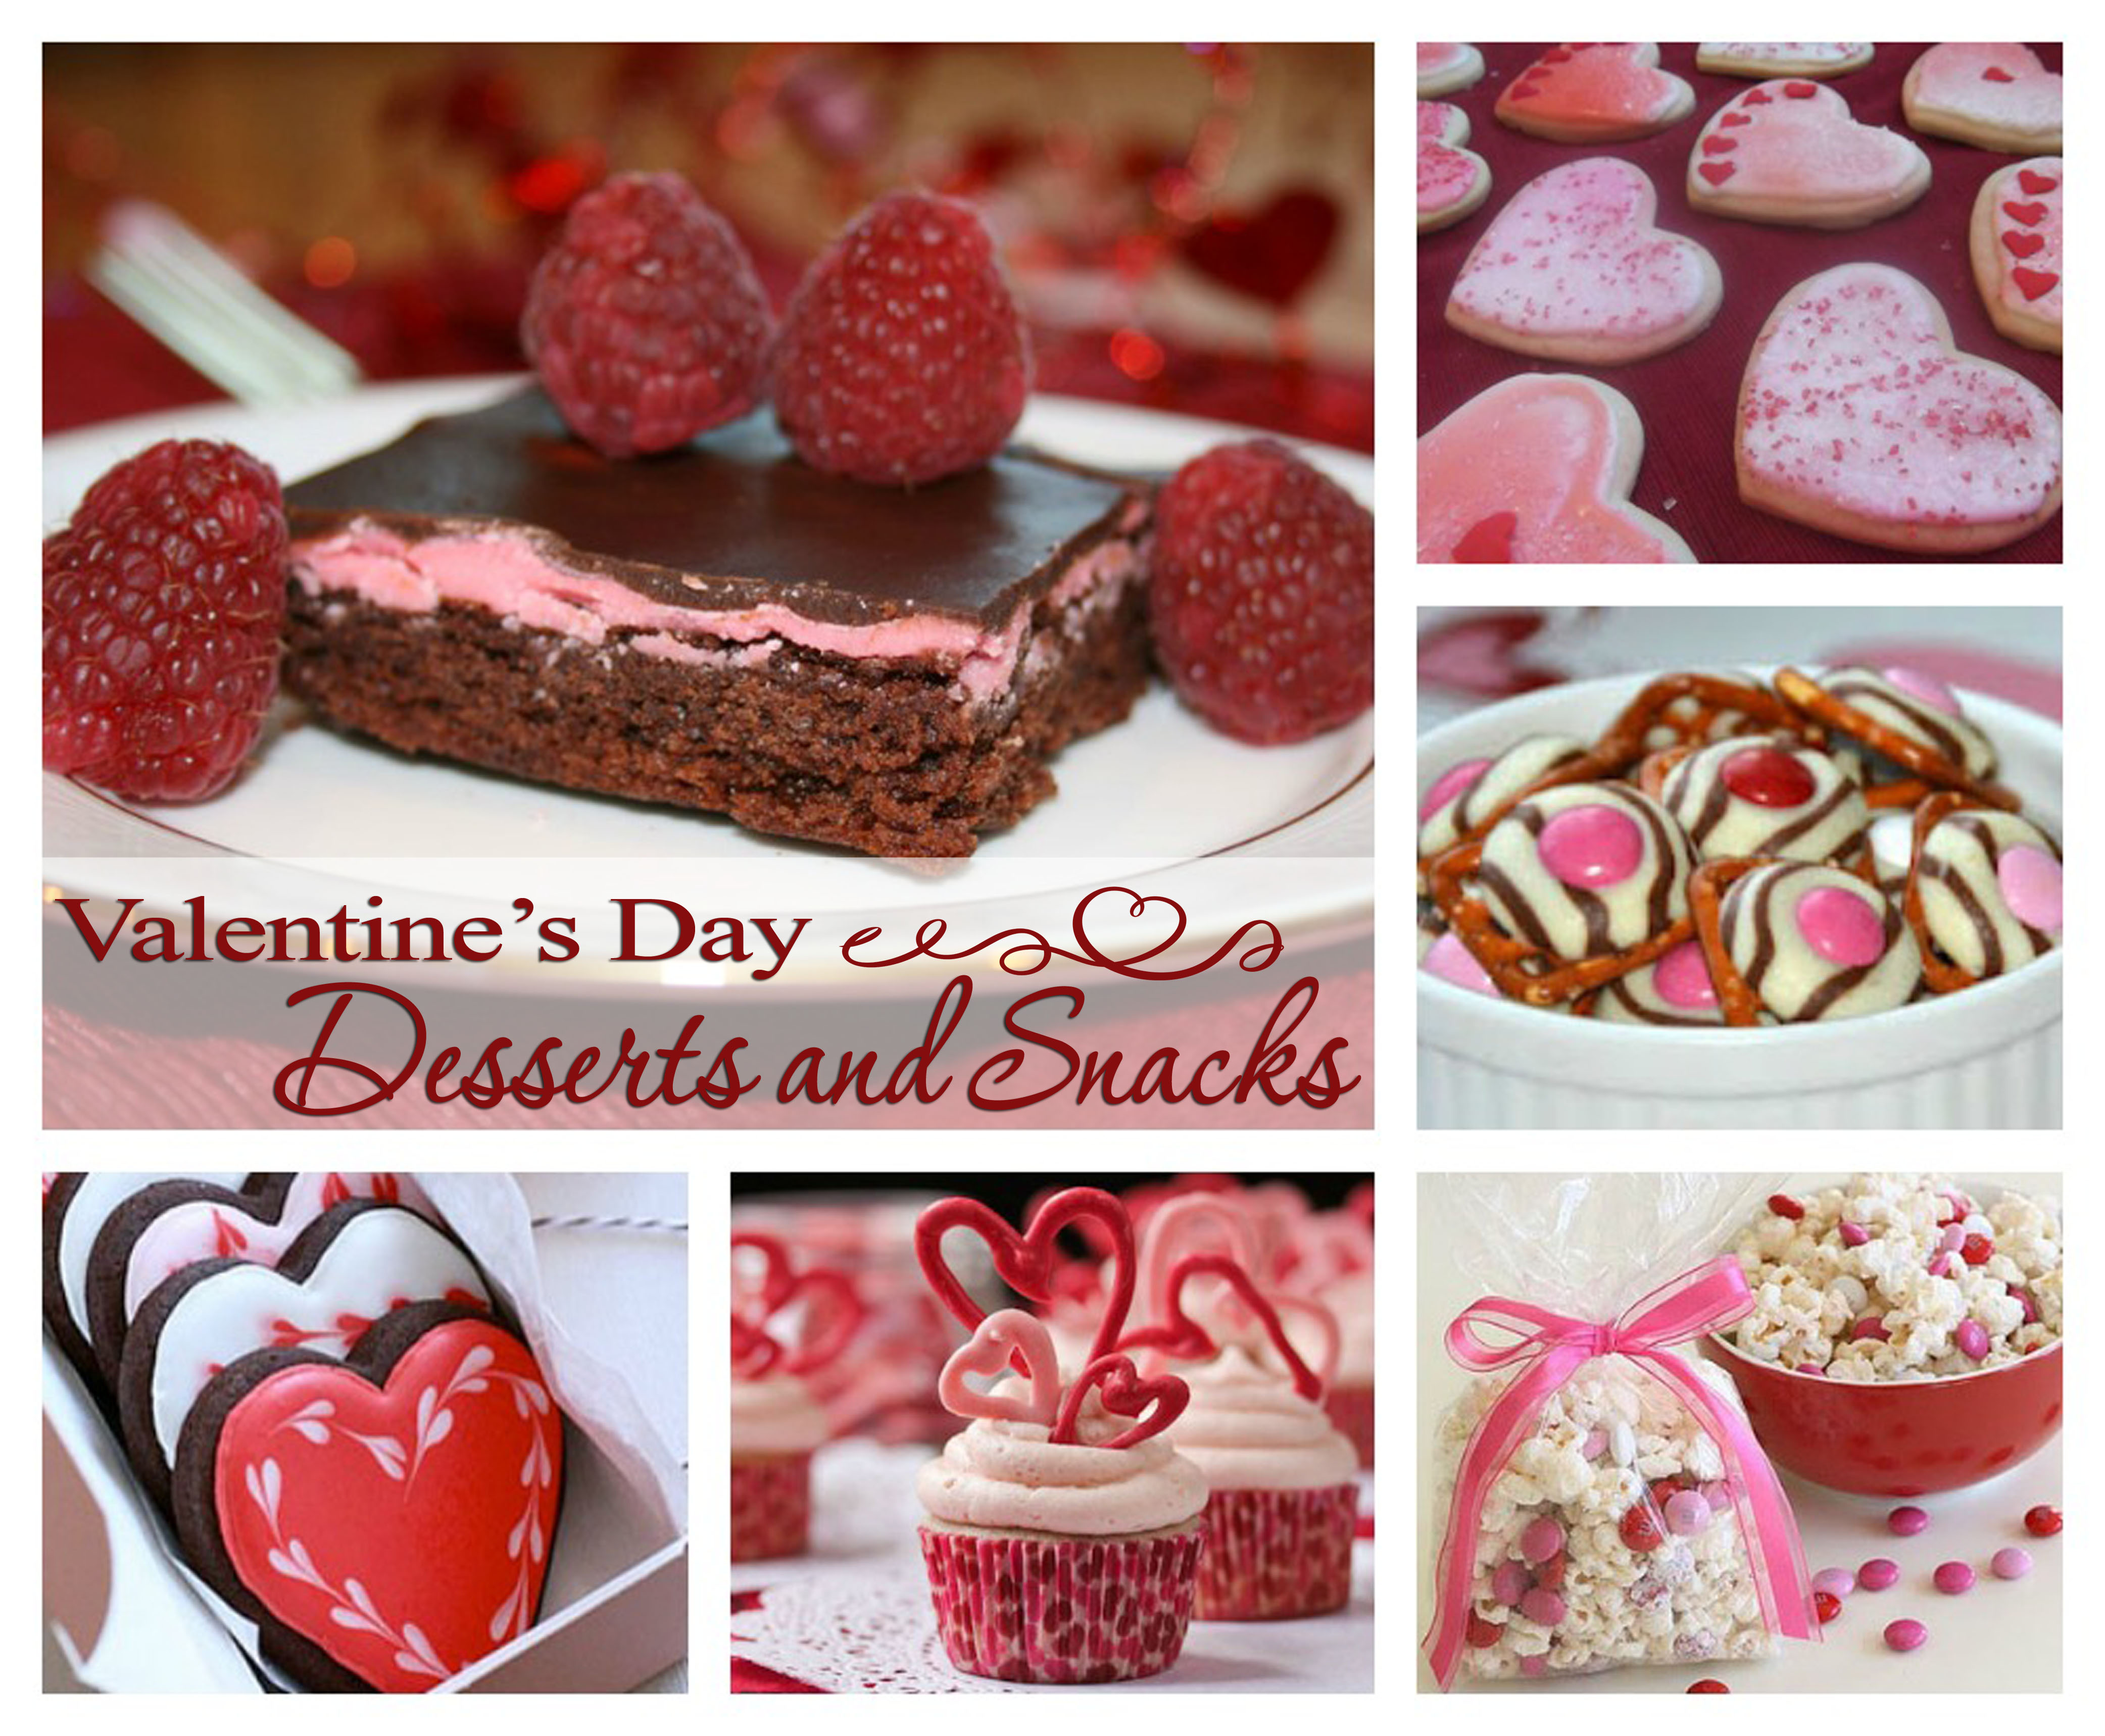 Valentine’s Day Dessert and Snack Ideas and Recipes